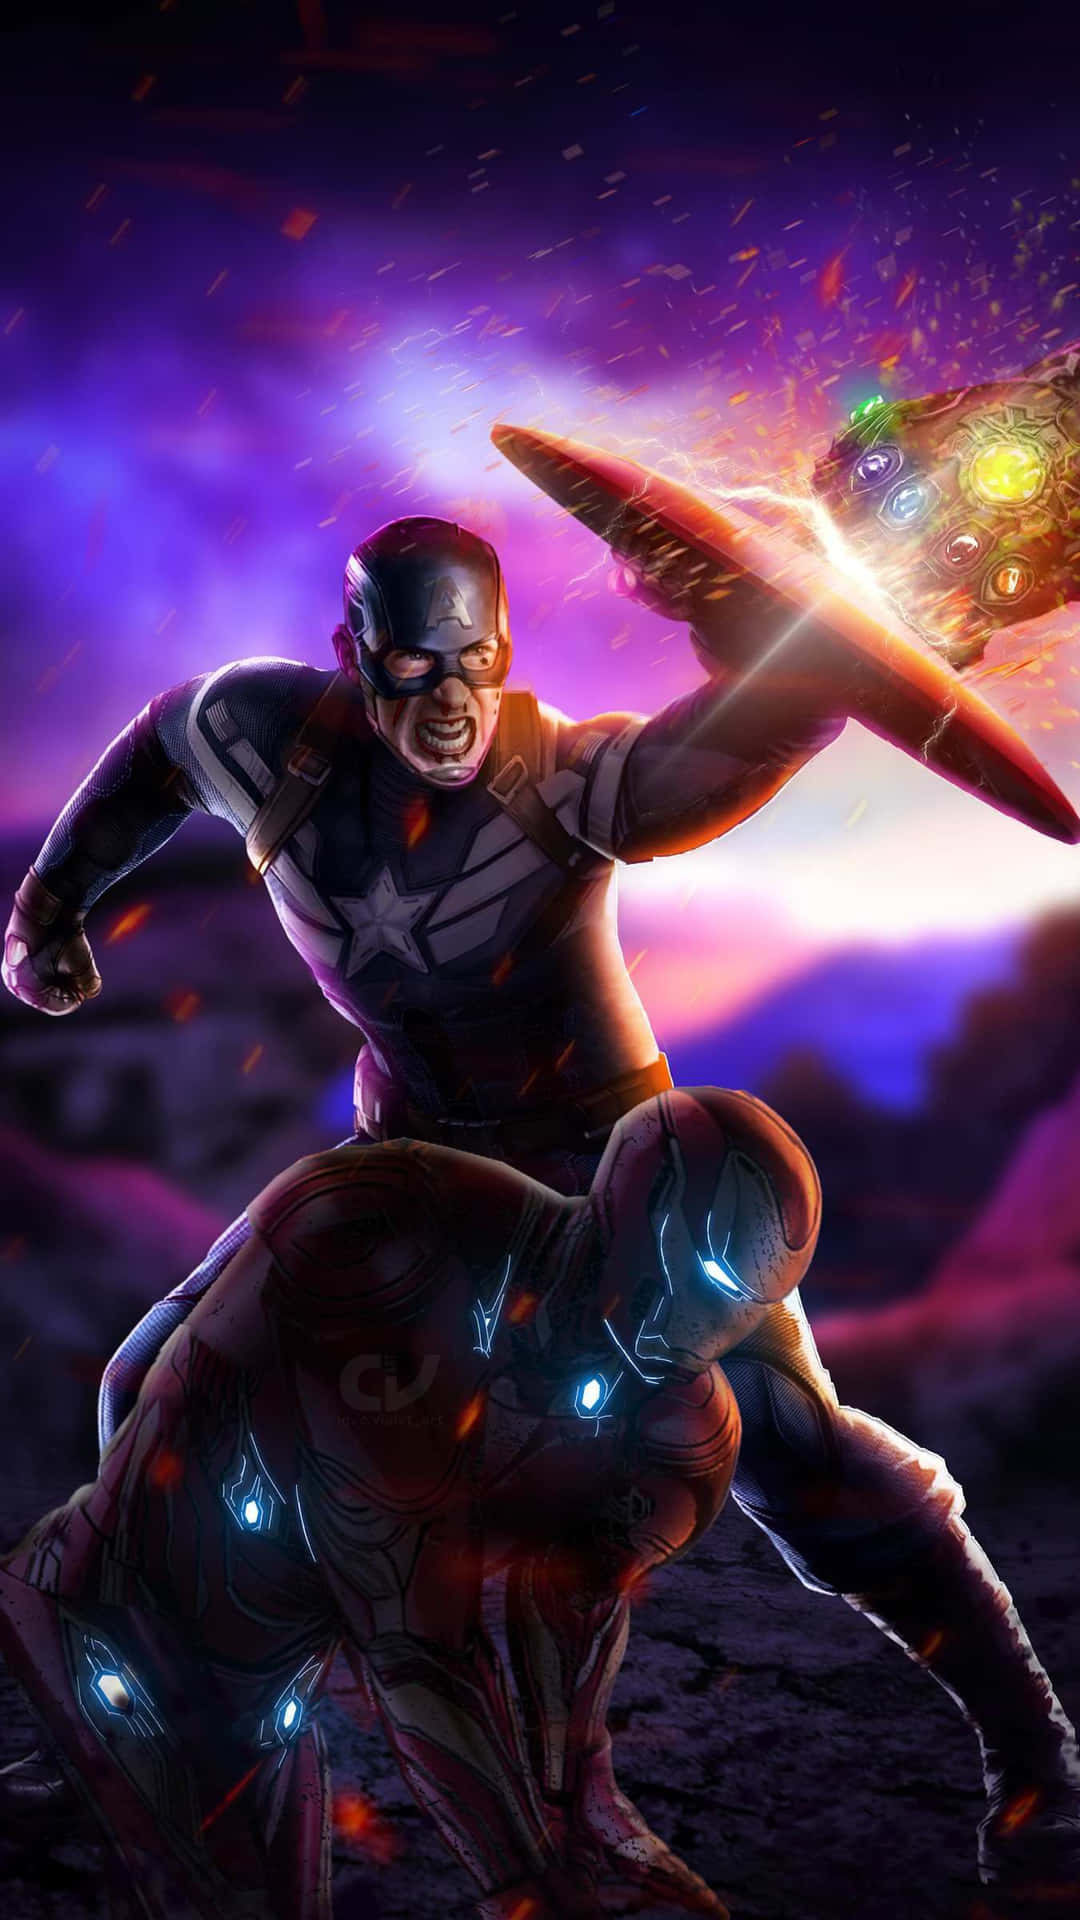 Get up to date with Avengers Endgame on your iPhone. Wallpaper